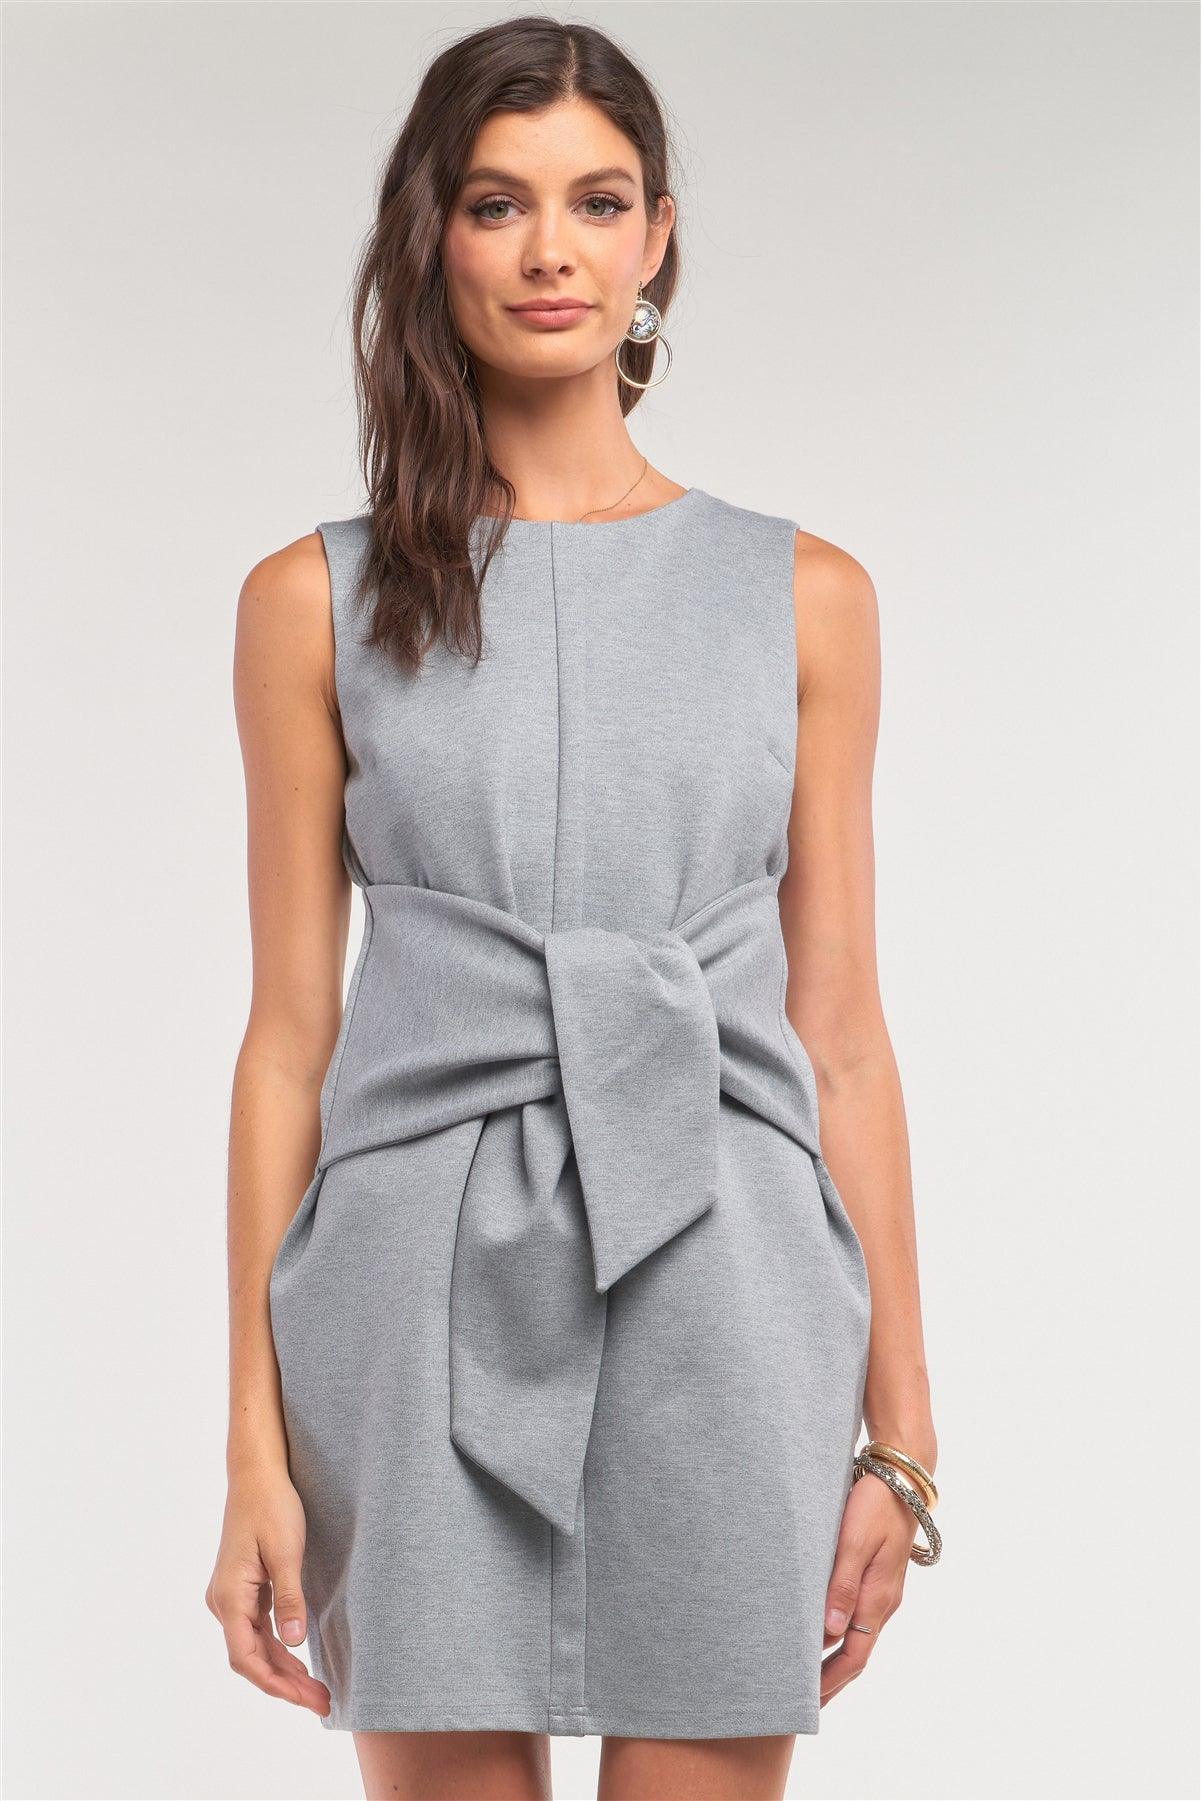 Heather Grey Sleeveless Round Neck Self-Tie Front Detail Fitted Mini Dress /1-2-2-1